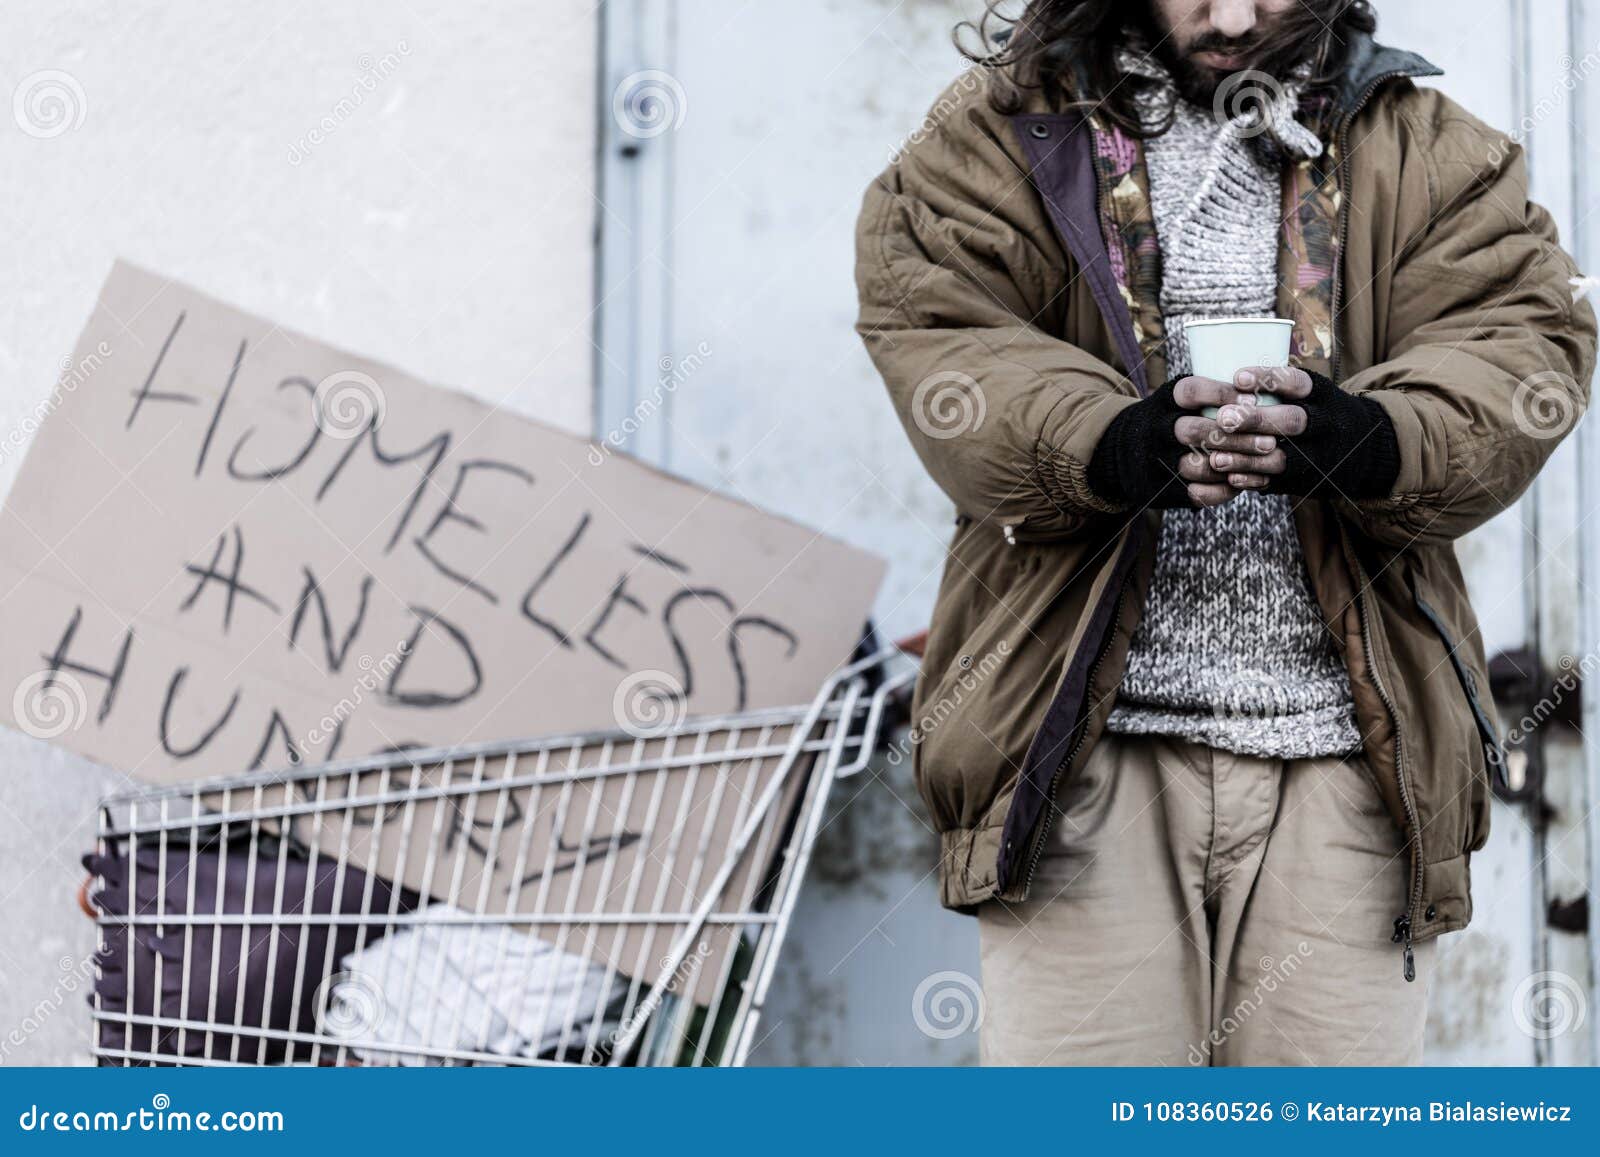 homeless and hungry vagrant